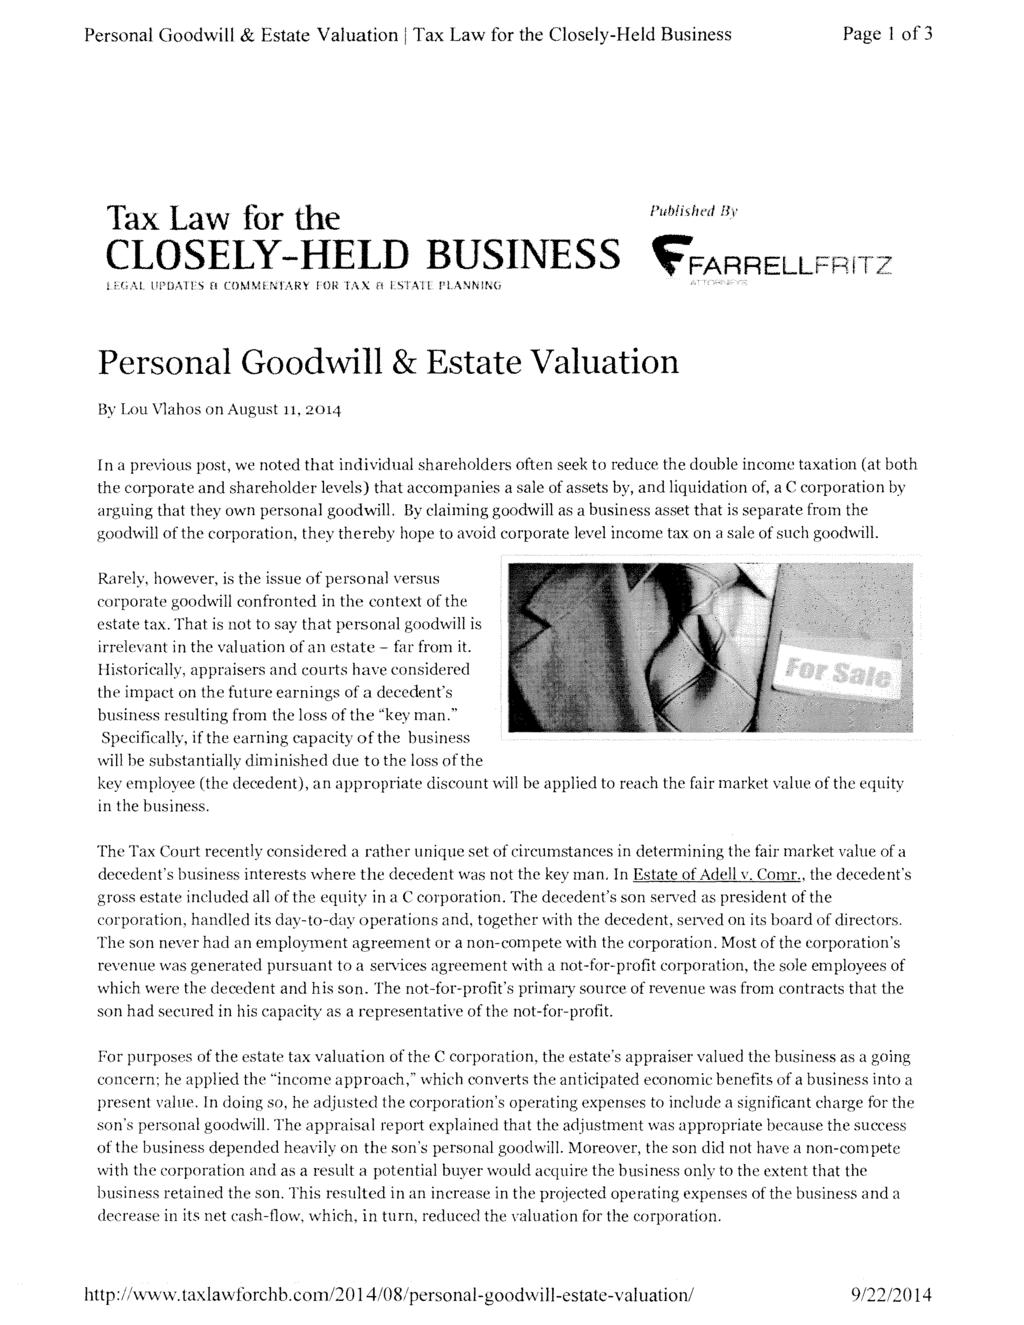 Personal Goodwill & Estate Valuationi Tax Law for the Closely-Held Business Page 1 of 3 Tax Law for the Publkhrd CLOSELY-HELD BUSINESS cfarrellfritz I EGAL COMMLNTARY FOR TAX a T.STA'I E.